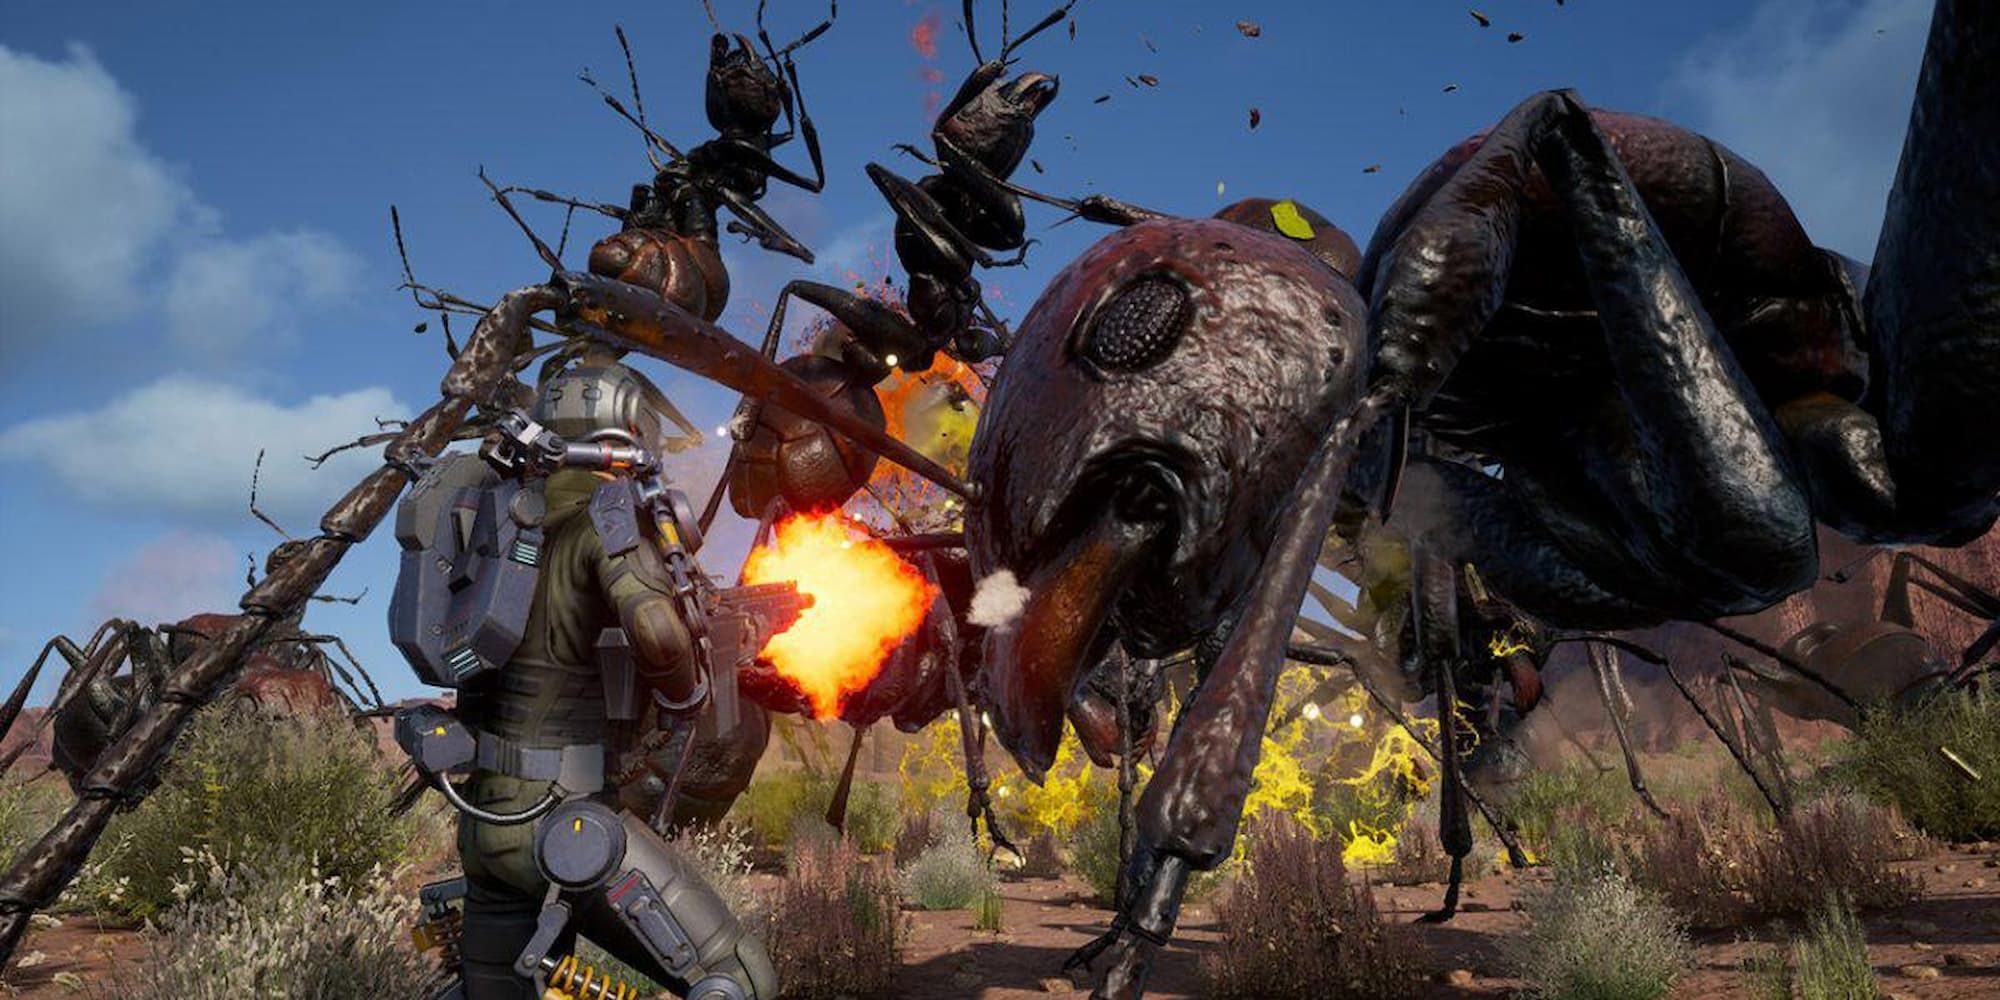 The player character fires upon a group of large invading ants in Earth Defense Force: Iron Rain.